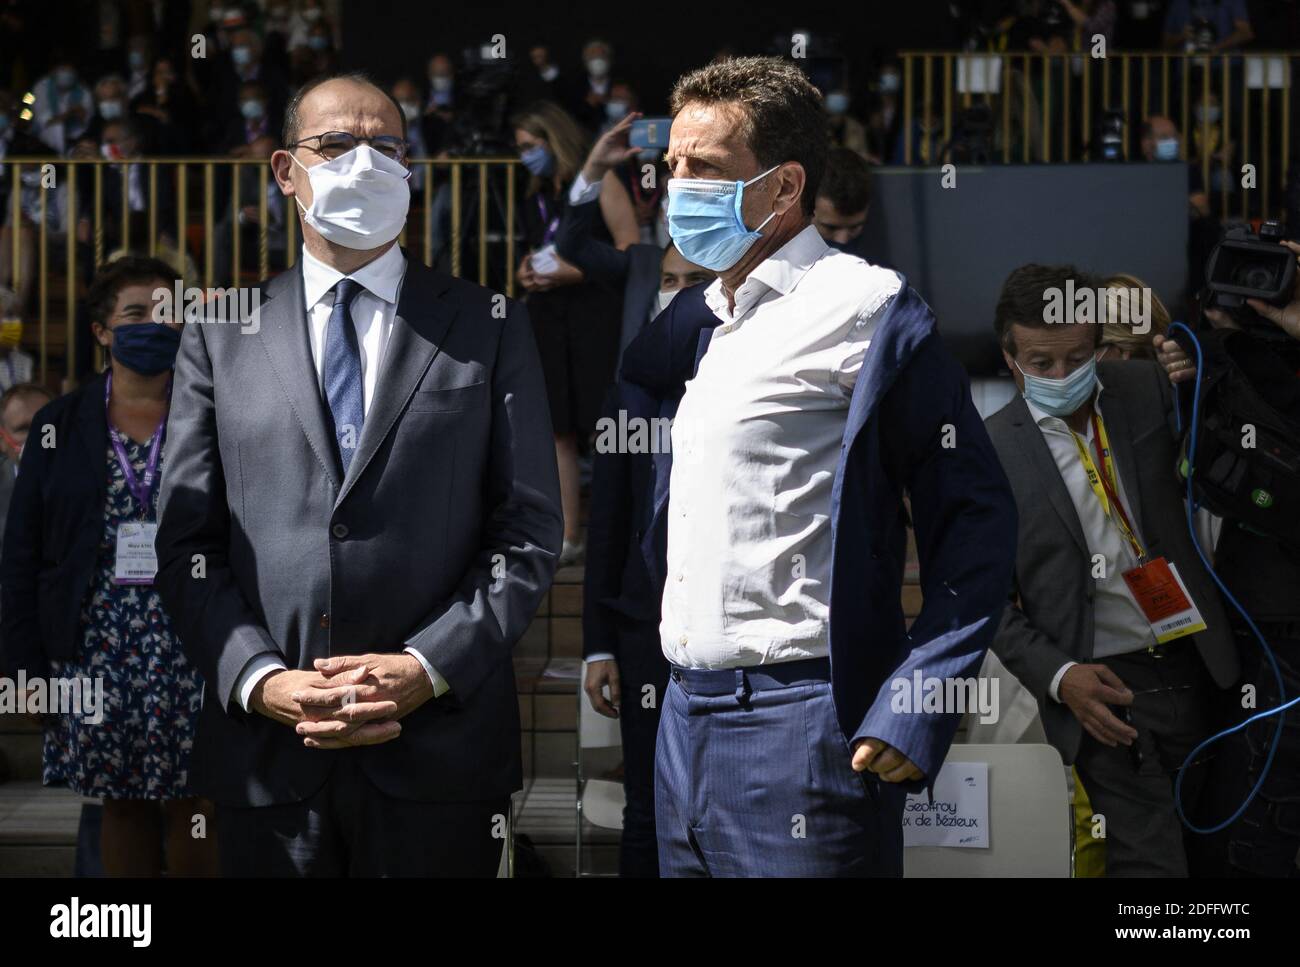 French Employers' association (Medef) President Geoffroy Roux de Bezieux (R) with French Prime Minister Jean Castex, wearing protective face masks, during the summer Medef meeting 'The Renaissance of French Companies' at the Longchamp horse racetrack in Paris on August 26, 2020. Photo by Eliot Blondet/ABACAPRESS.COM Stock Photo